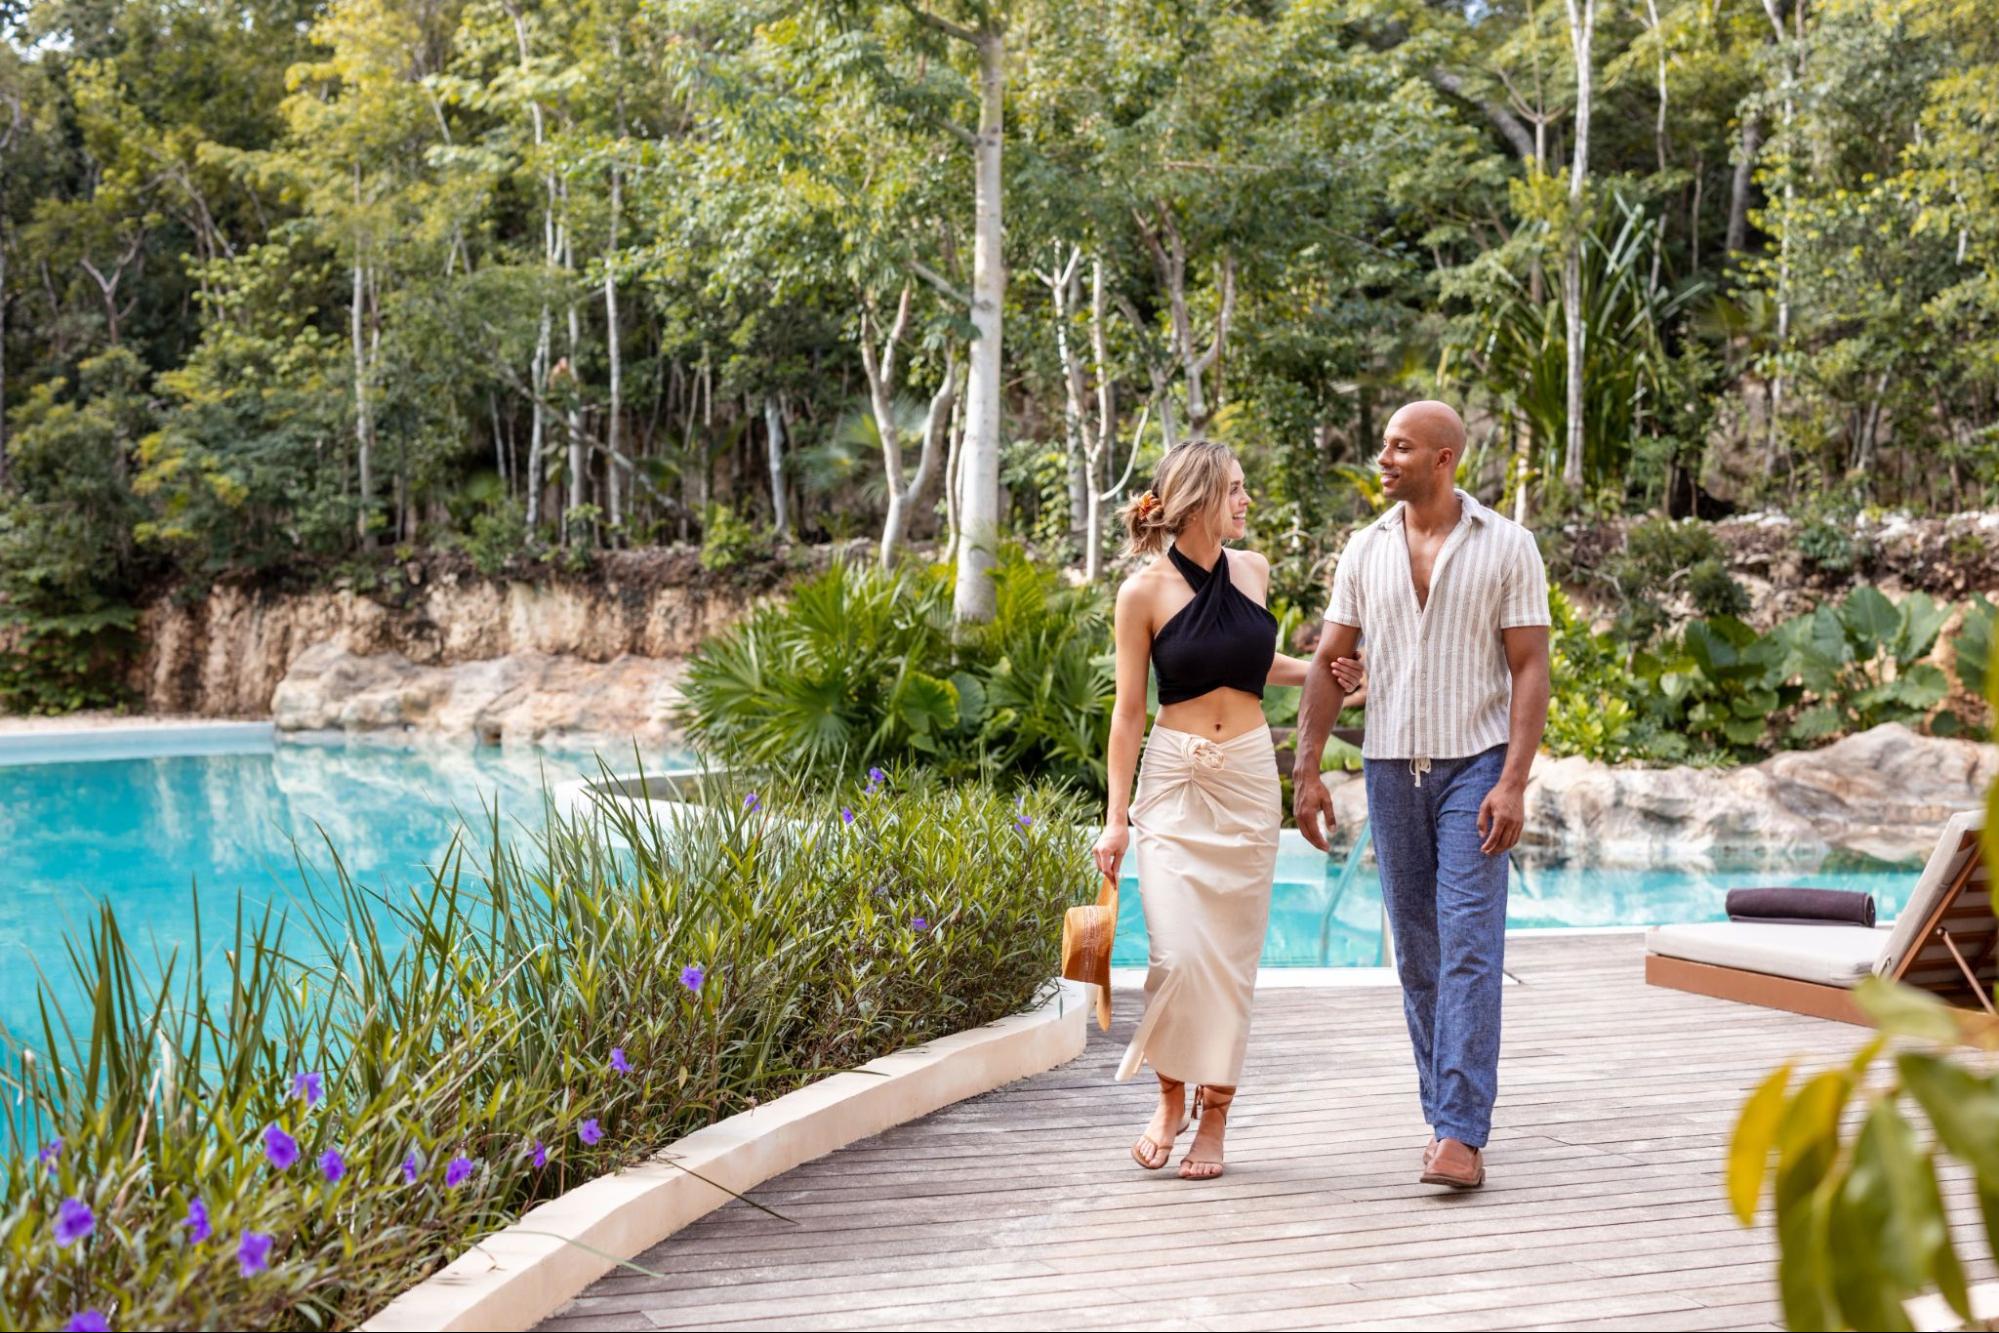 Couples spa getaways are good for your health